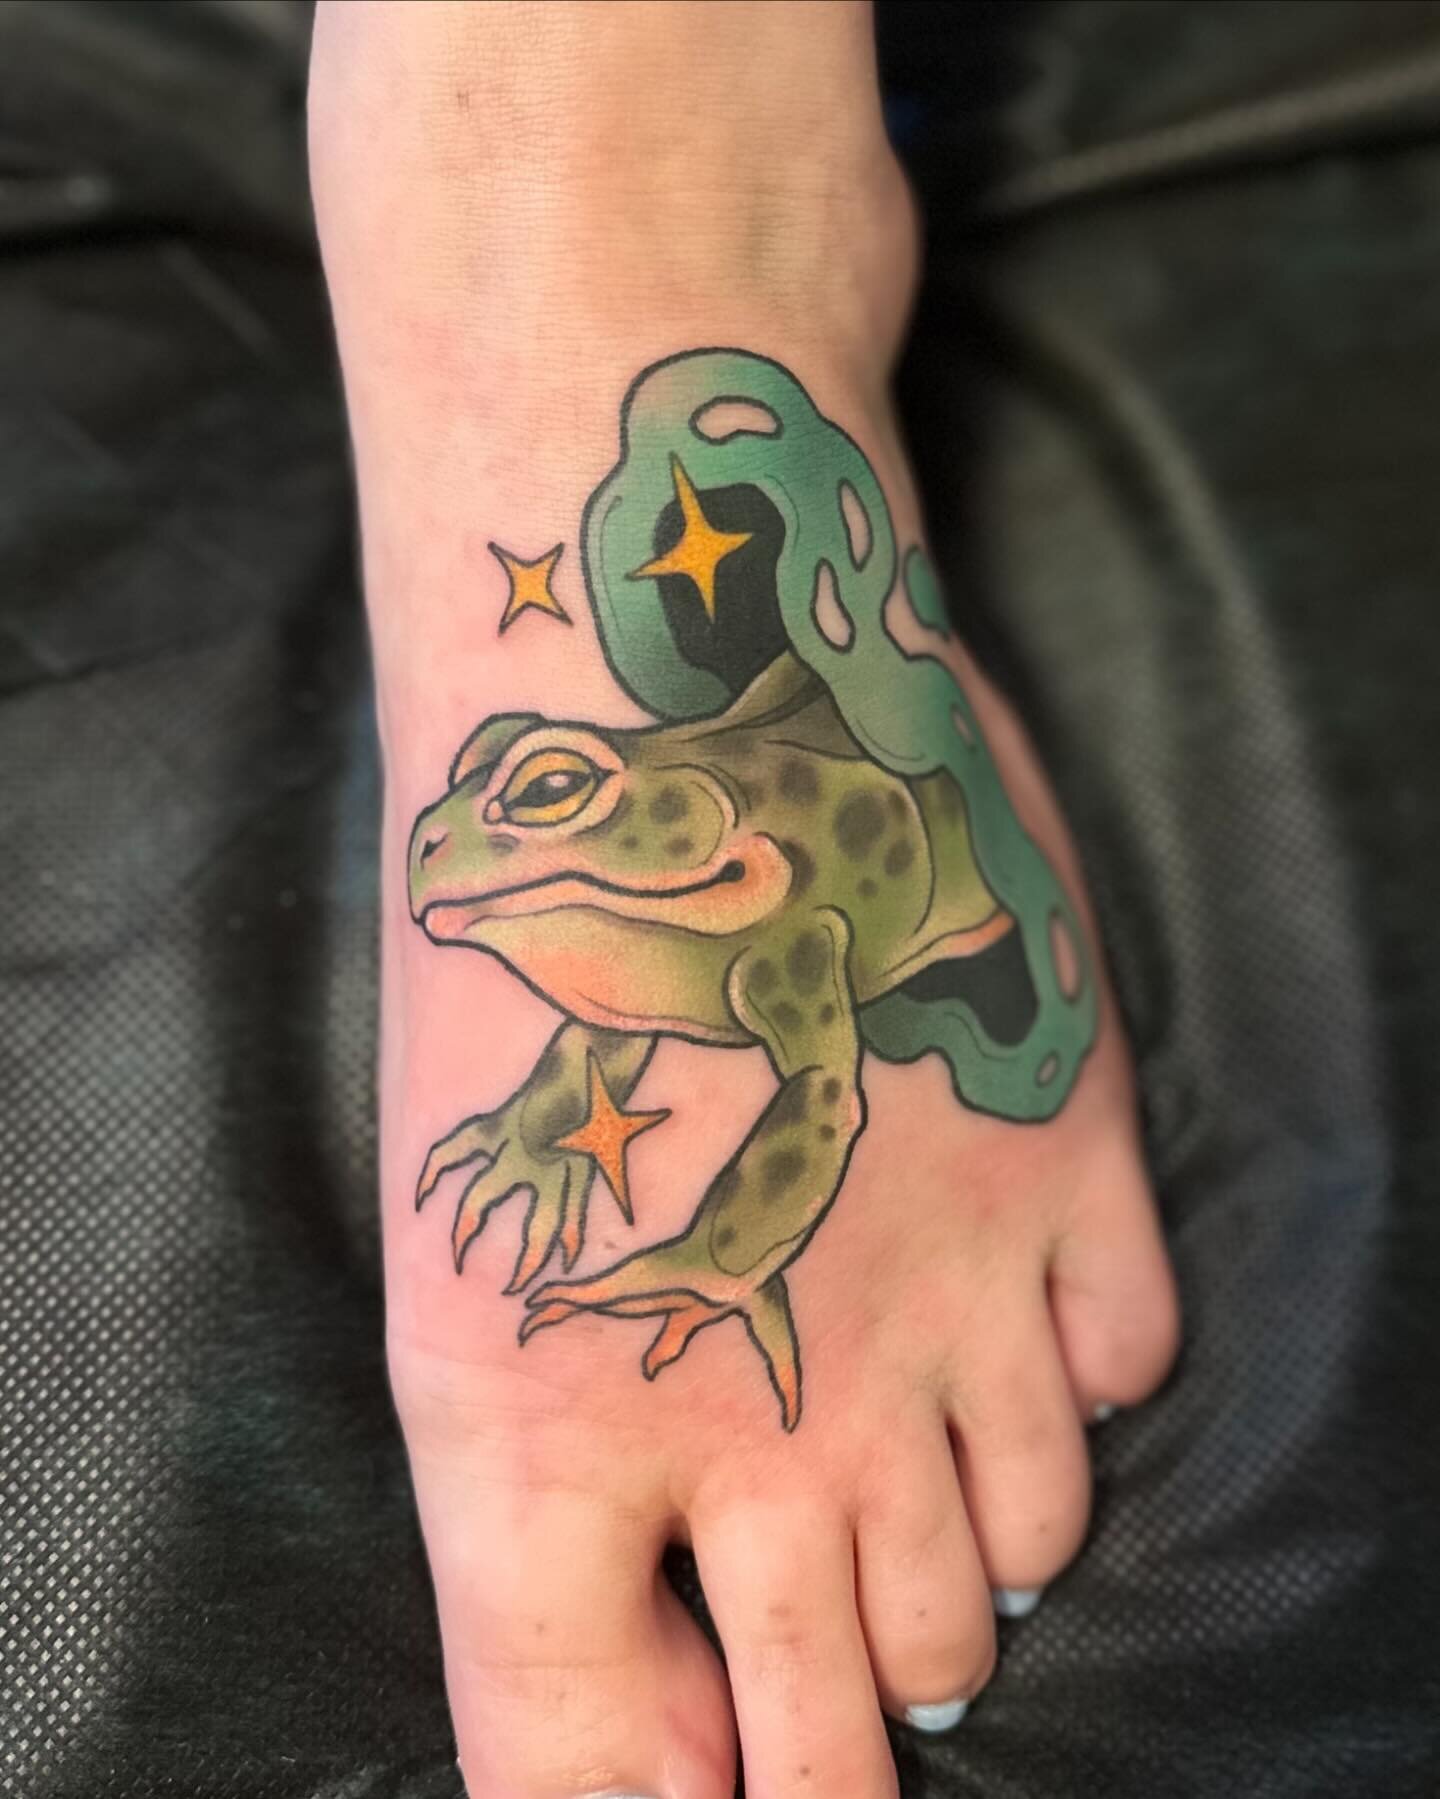 Lil portal frog on the foot for Taylor a bit ago💚✨